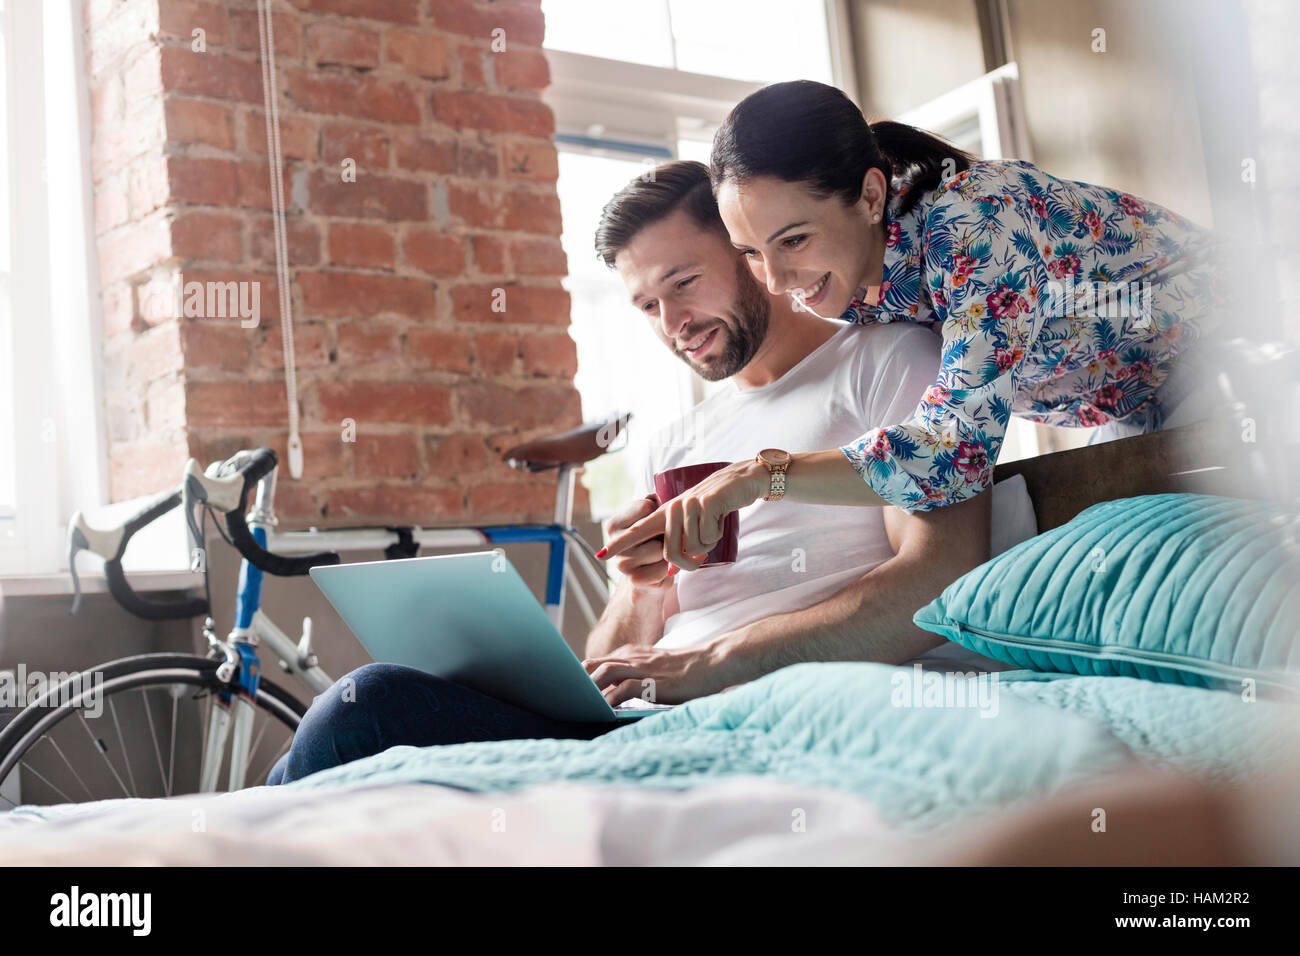 Couple drinking coffee using laptop on bed Stock Photo